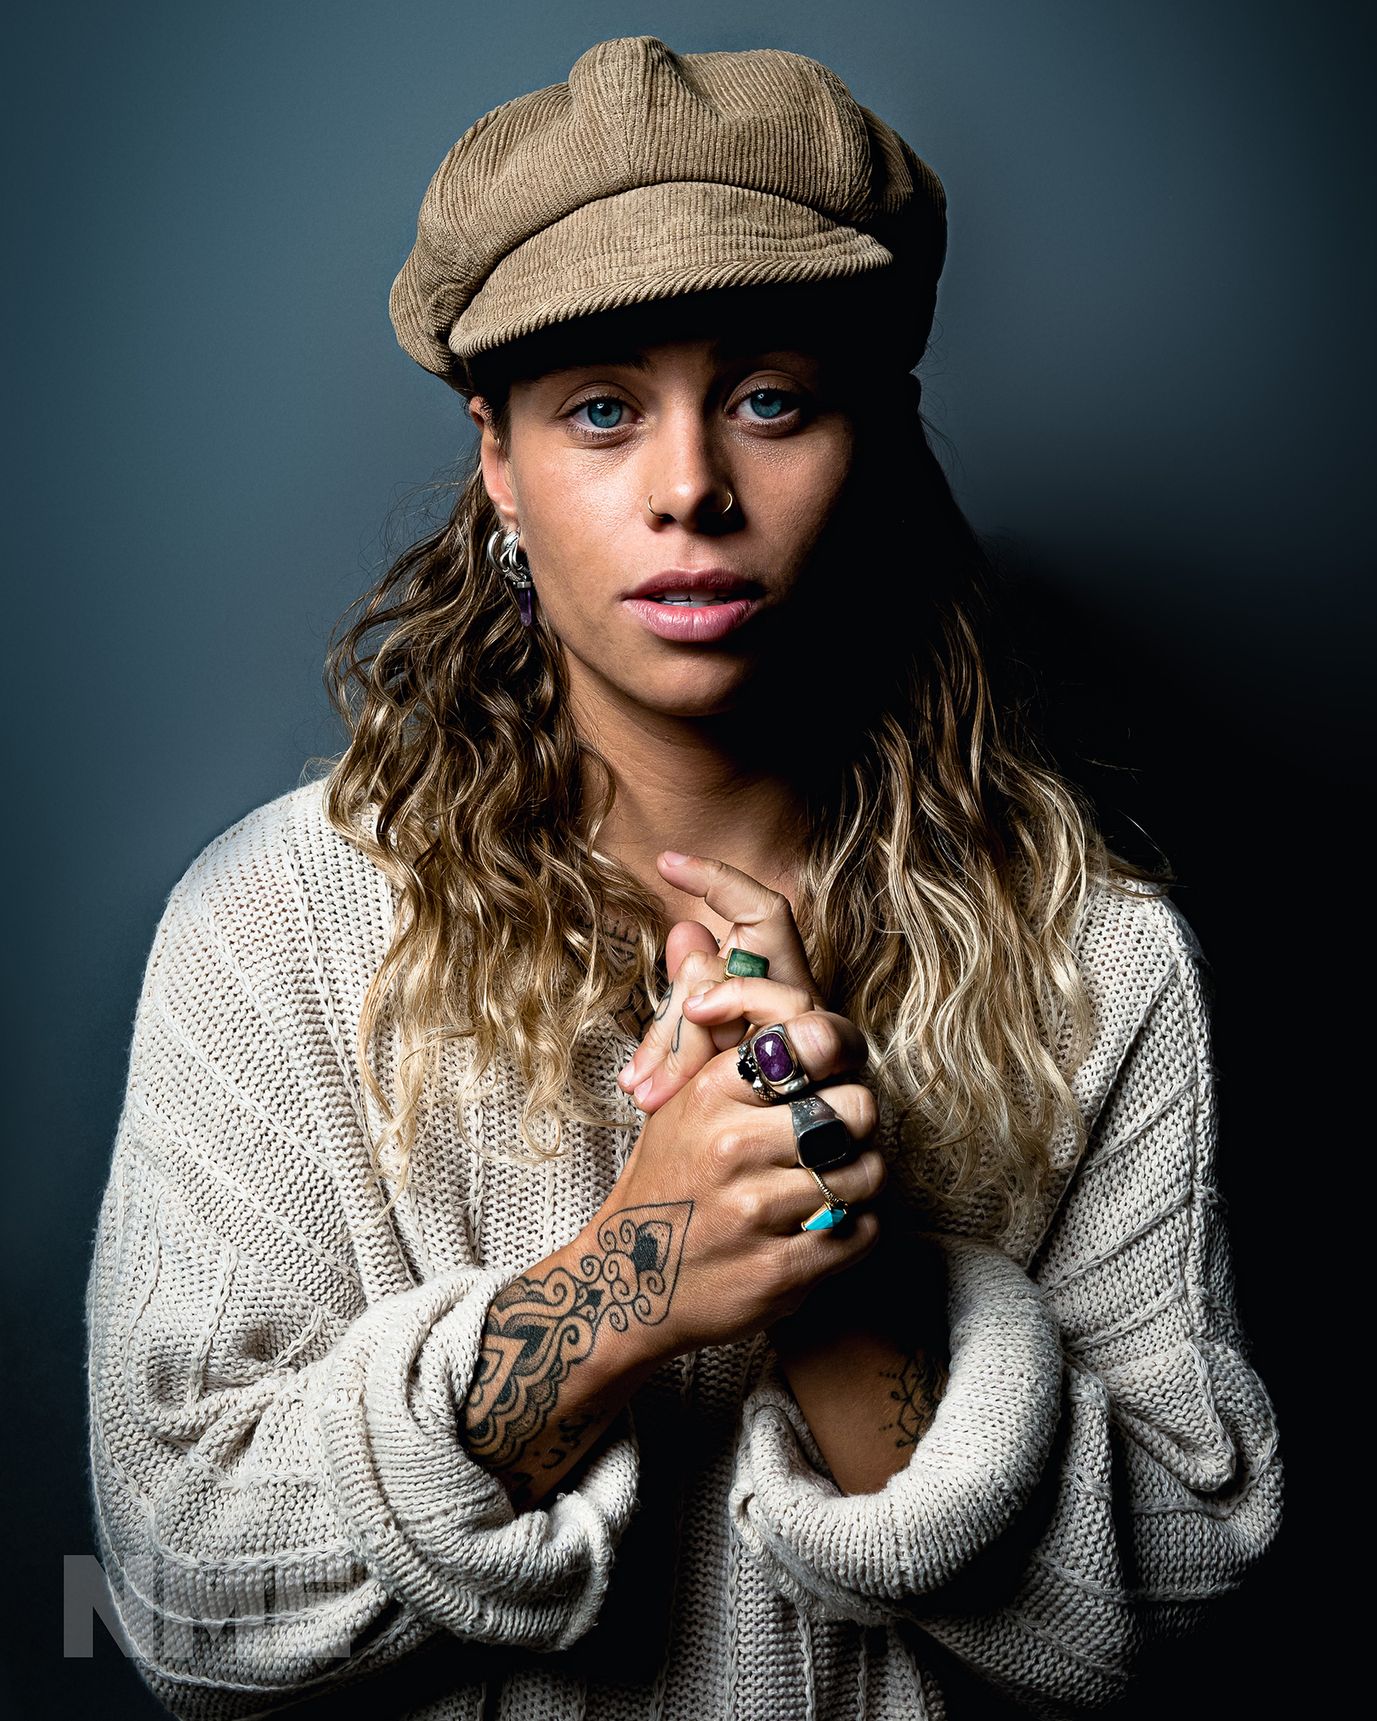 Meaning of Jungle by Tash Sultana